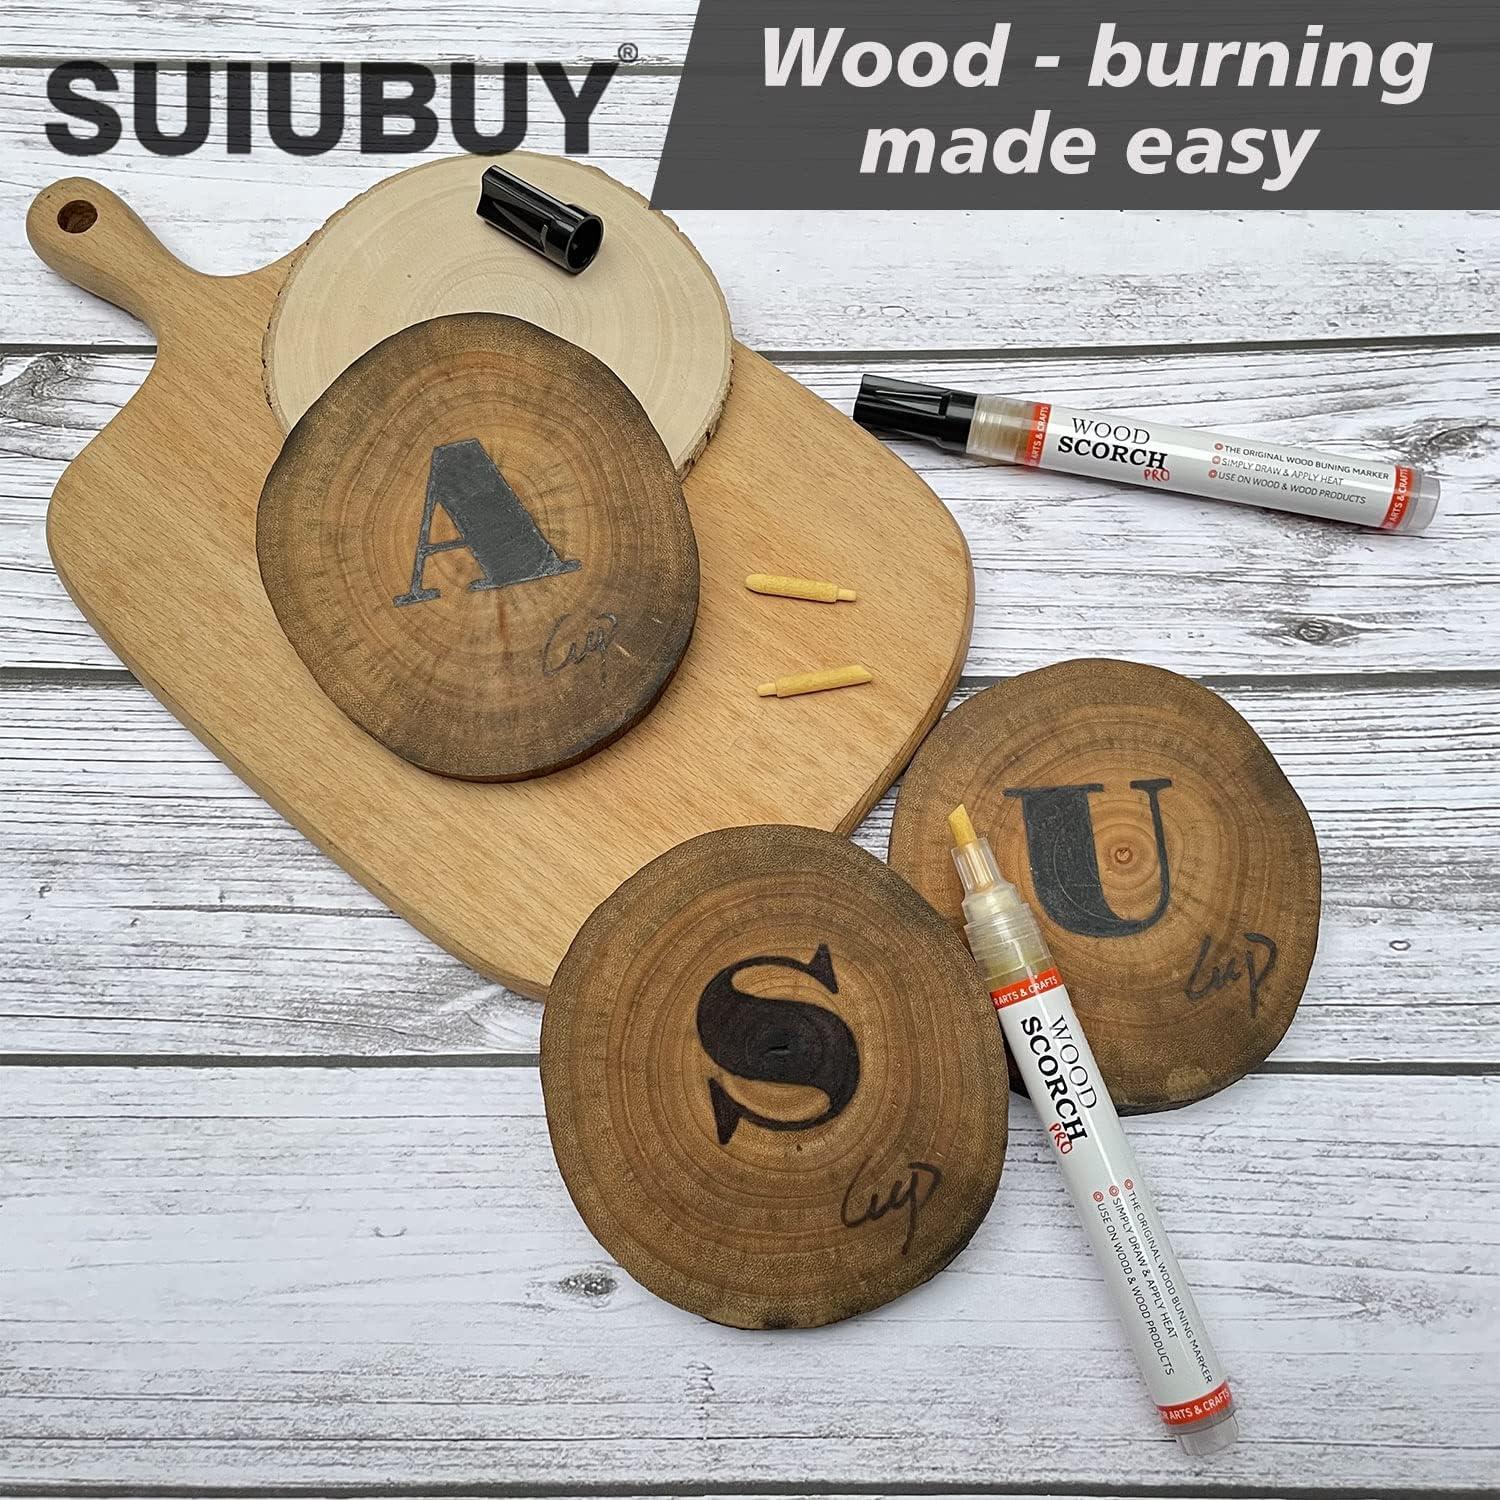 Wood burning the easy way! This scorch pen is part one of this easy 2-step  project